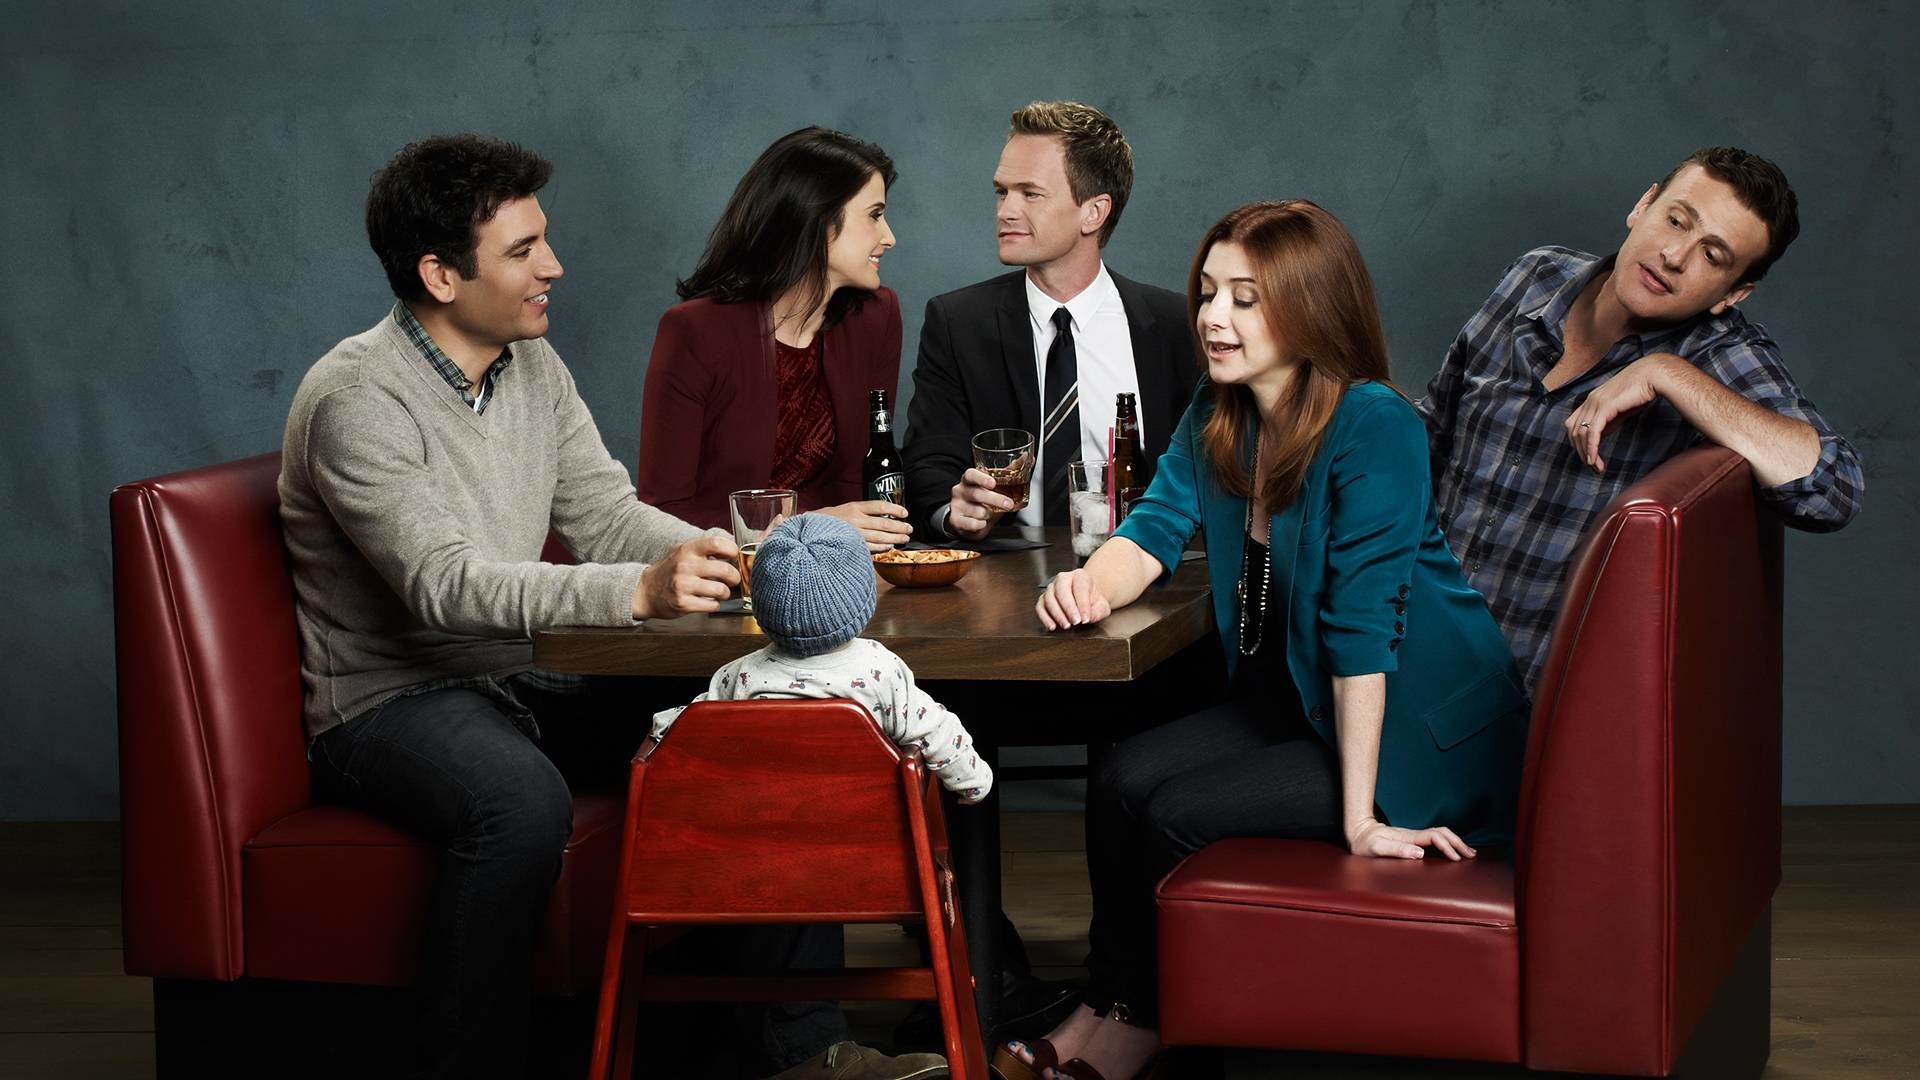 1920x1080 High Quality How I Met Your Mother Wallpapers | Full HD Pictures